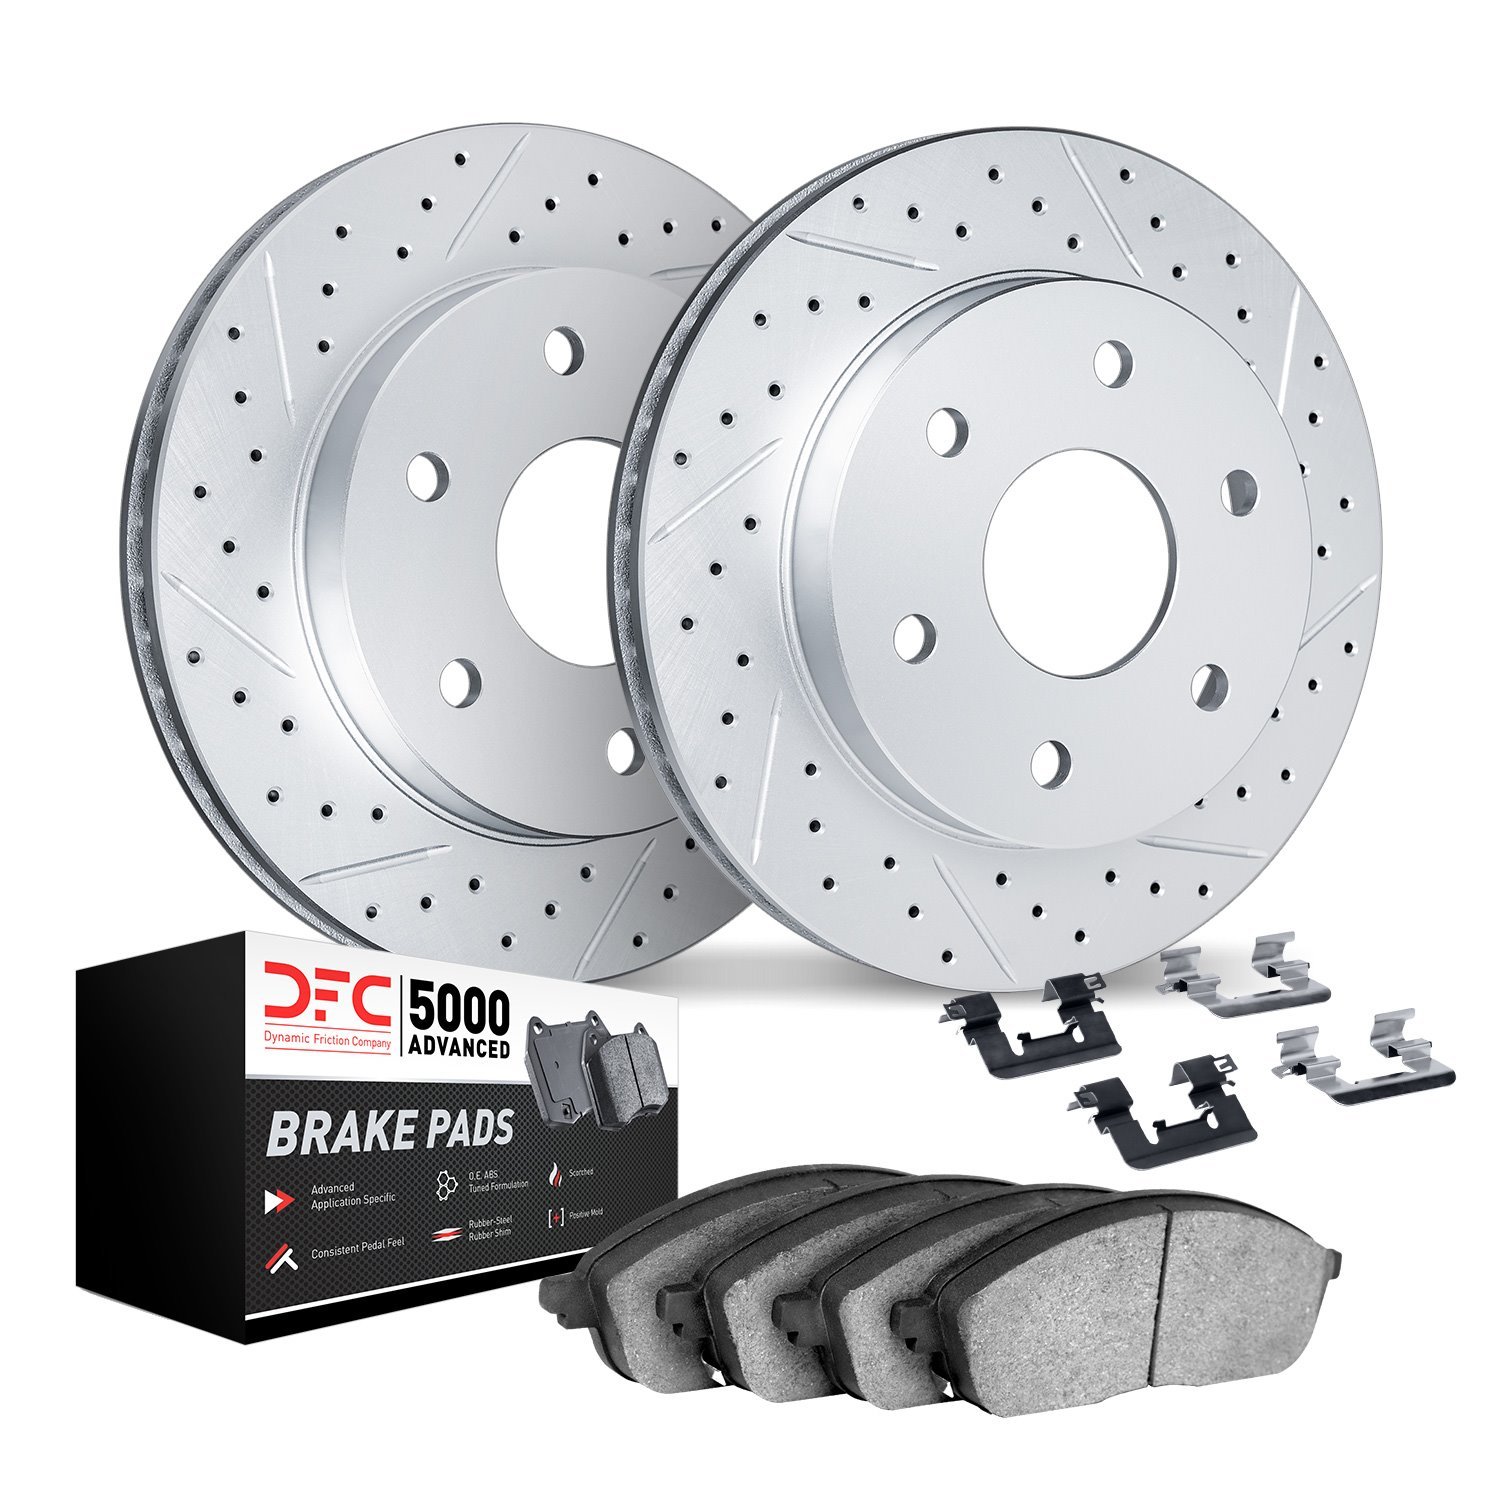 2512-48048 Geoperformance Drilled/Slotted Rotors w/5000 Advanced Brake Pads Kit & Hardware, 2002-2009 GM, Position: Rear